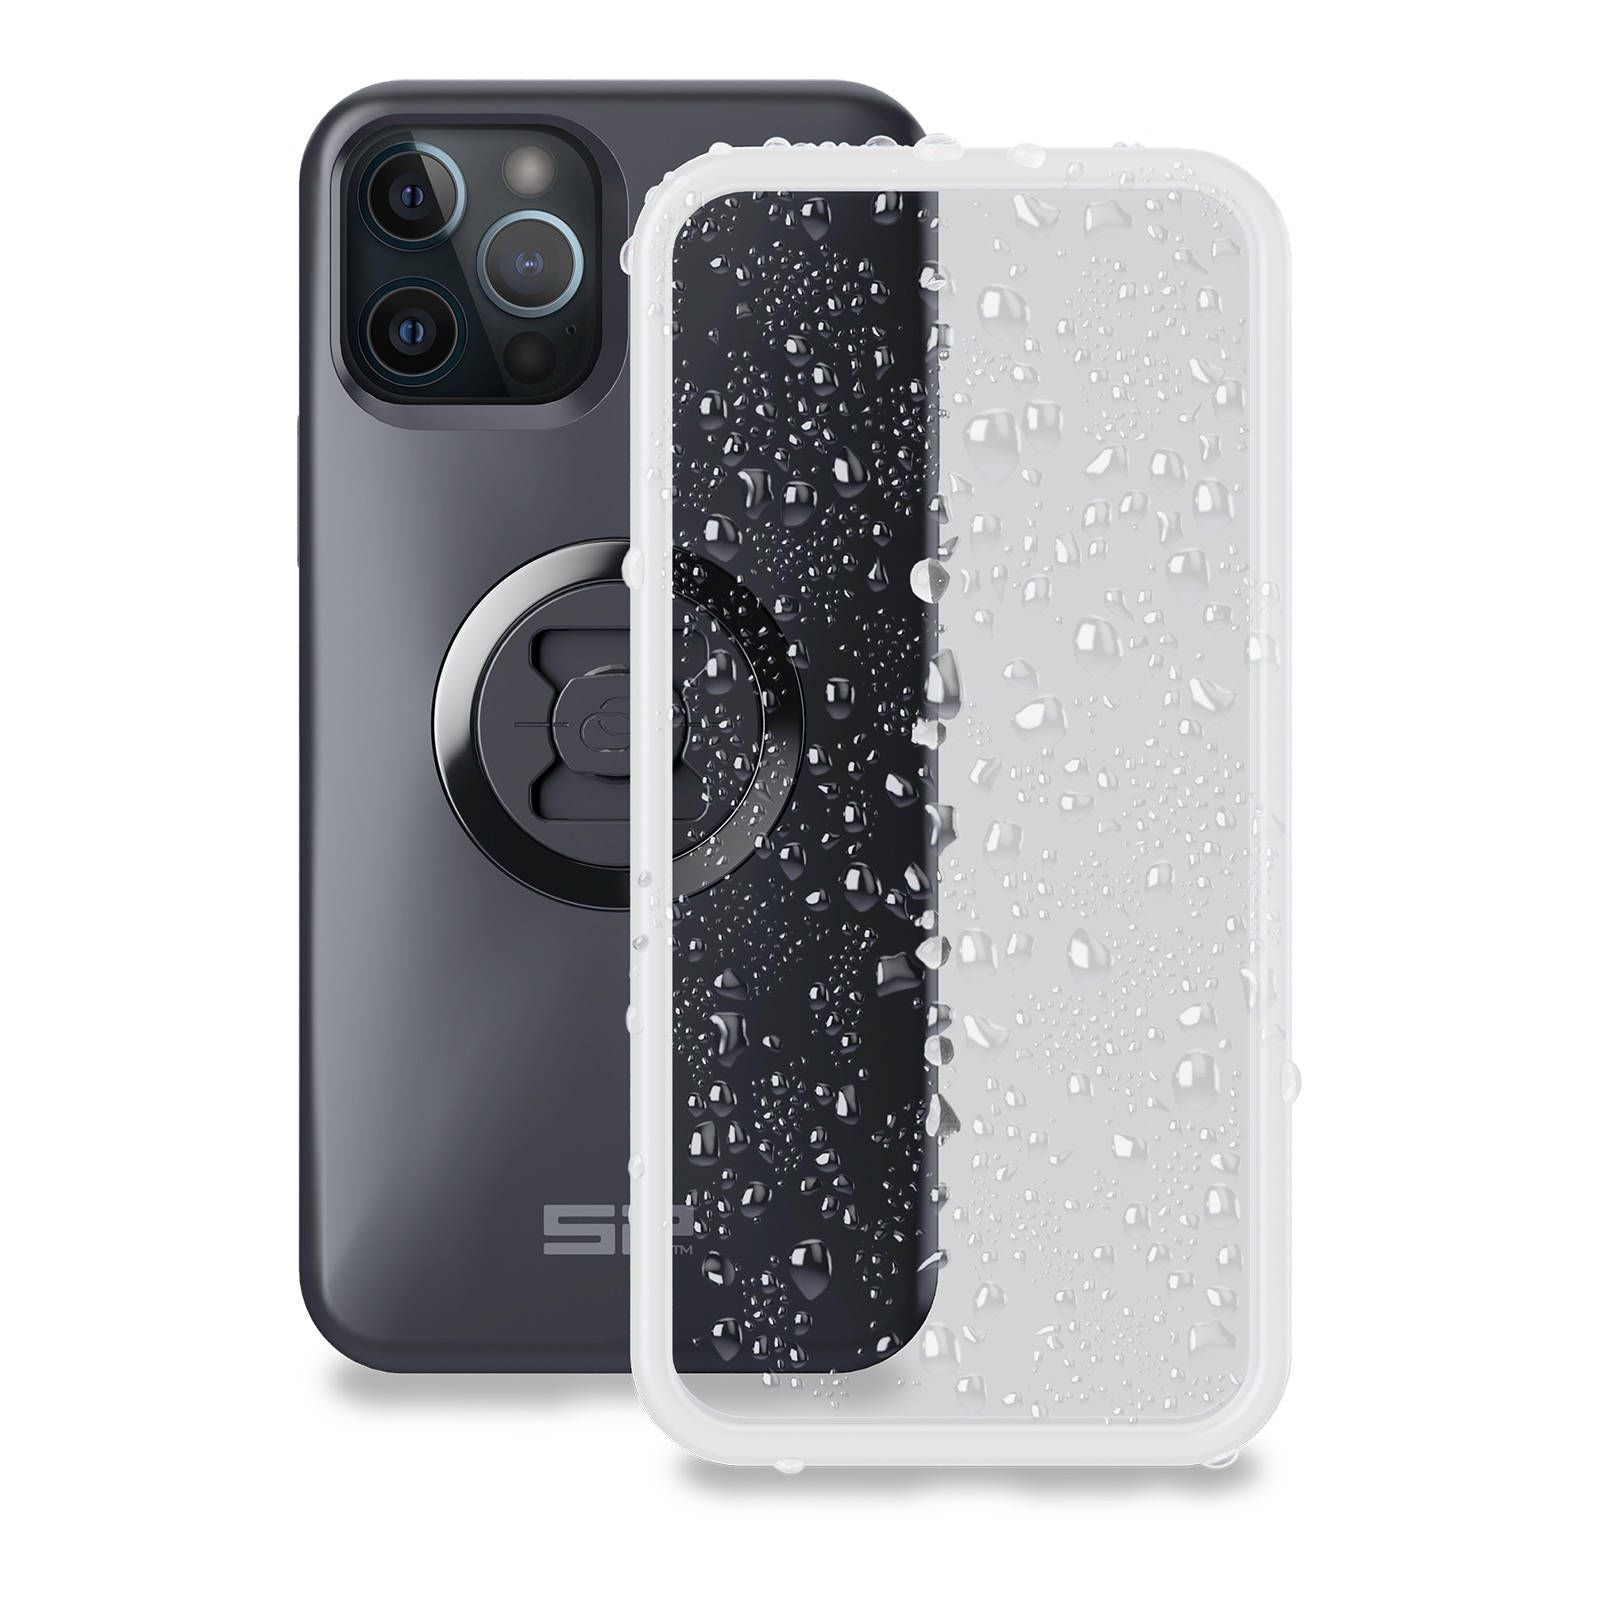 New SP CONNECT WEATHER COVER APPLE IPHONE 12 // 12 PRO SPC55233